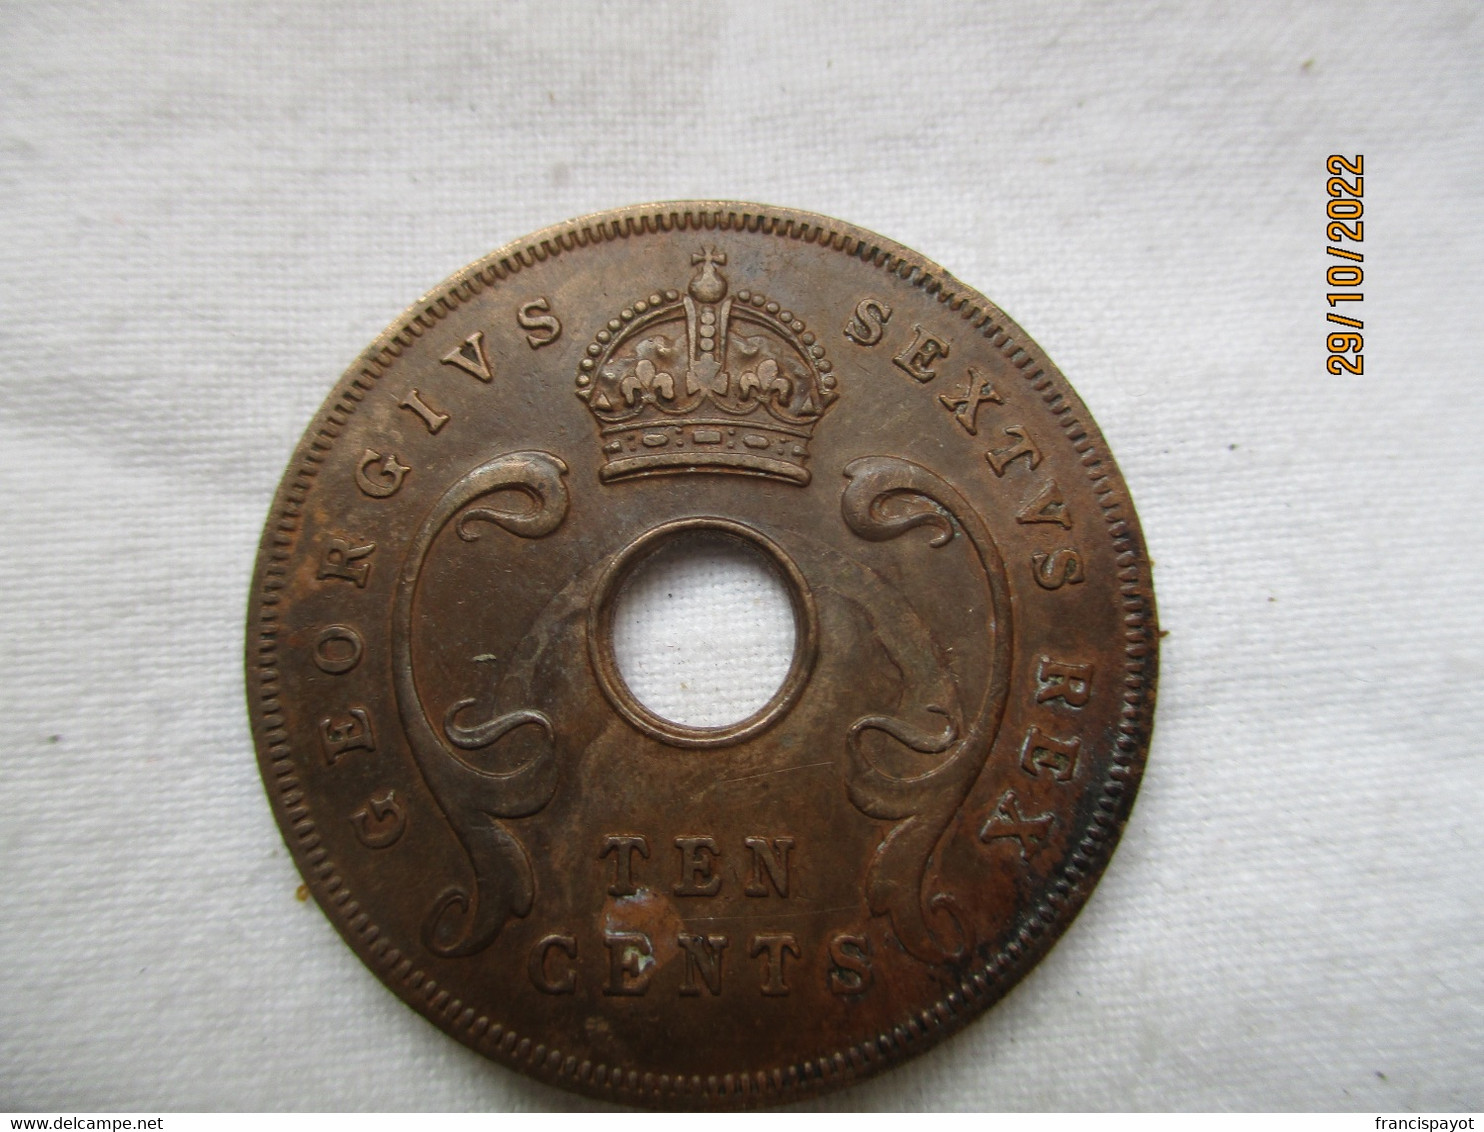 British East Africa: 10 Cents 1952 - Colonia Británica